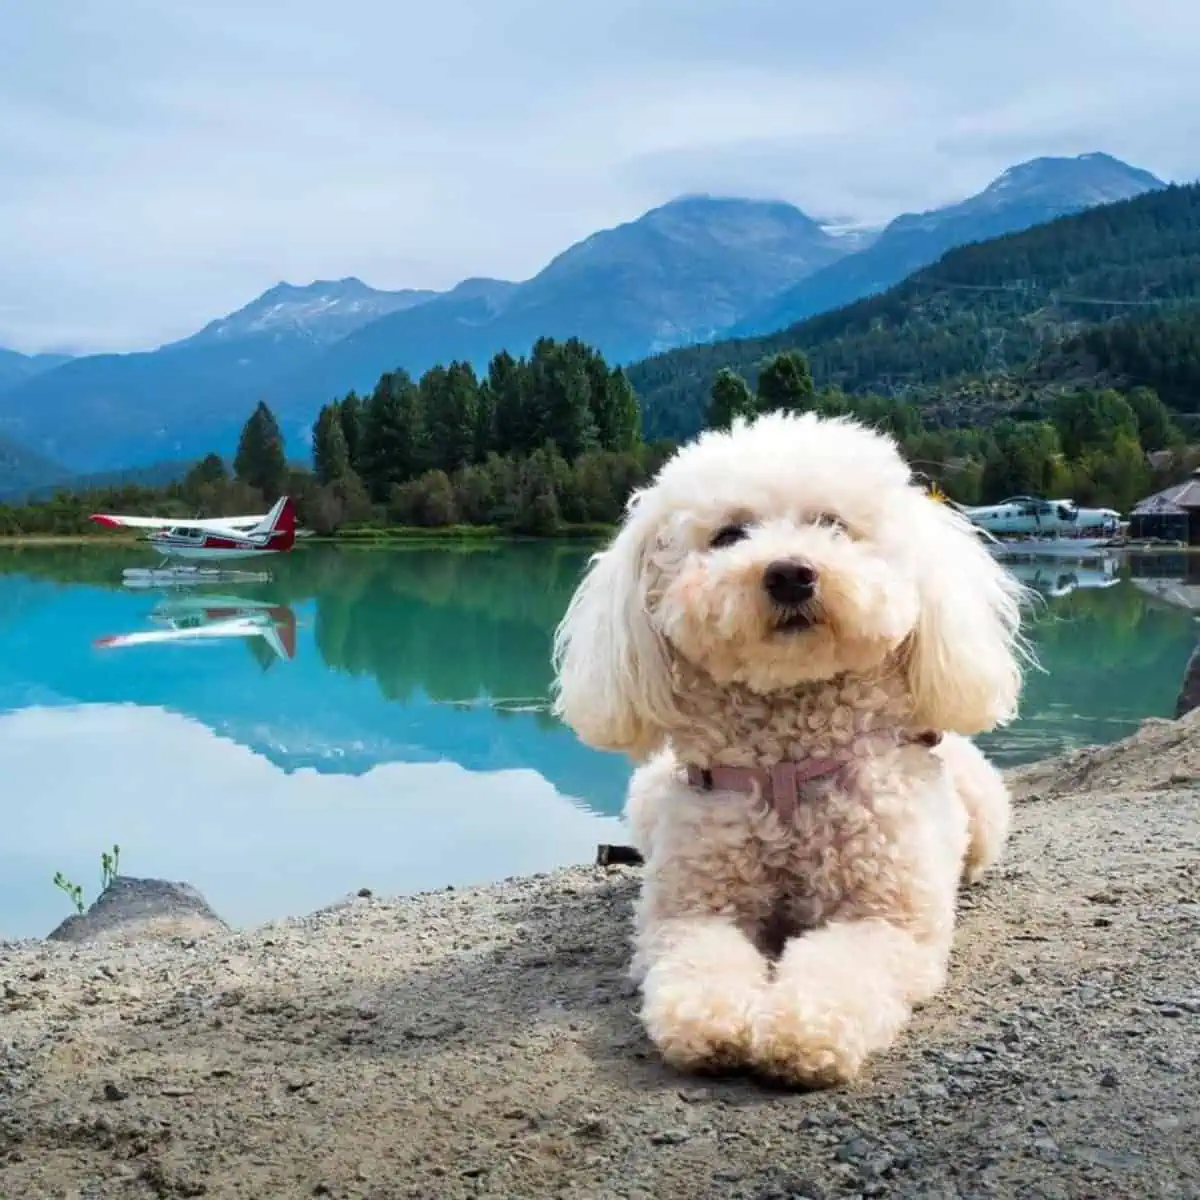 Toy Poodle outdoors